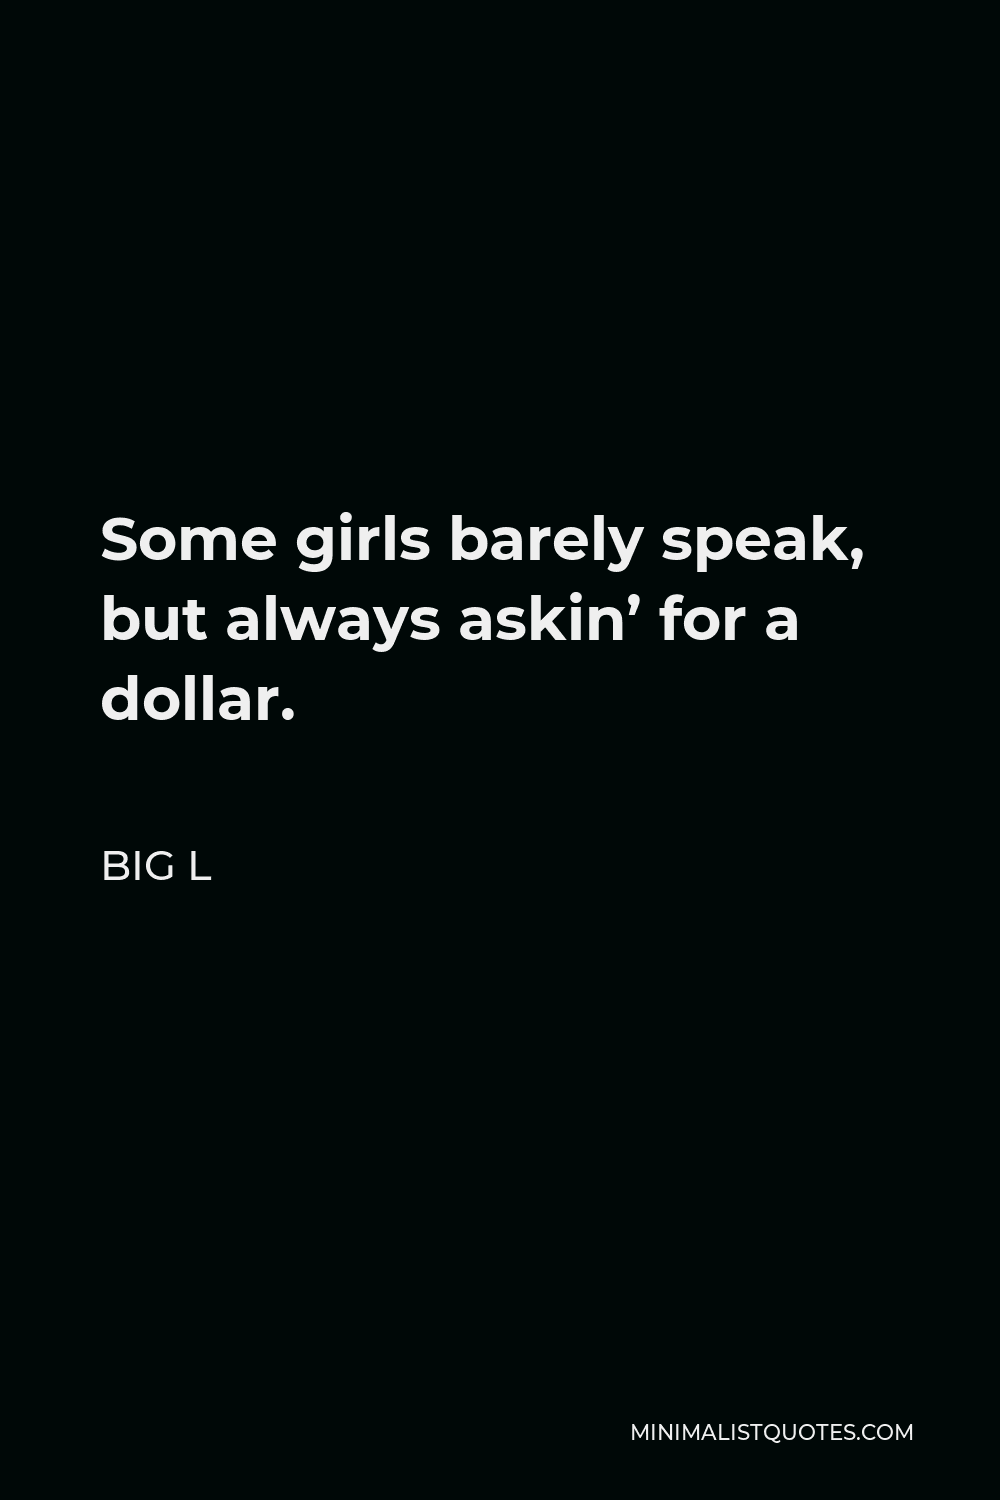 Big L Quote - Some girls barely speak, but always askin’ for a dollar.